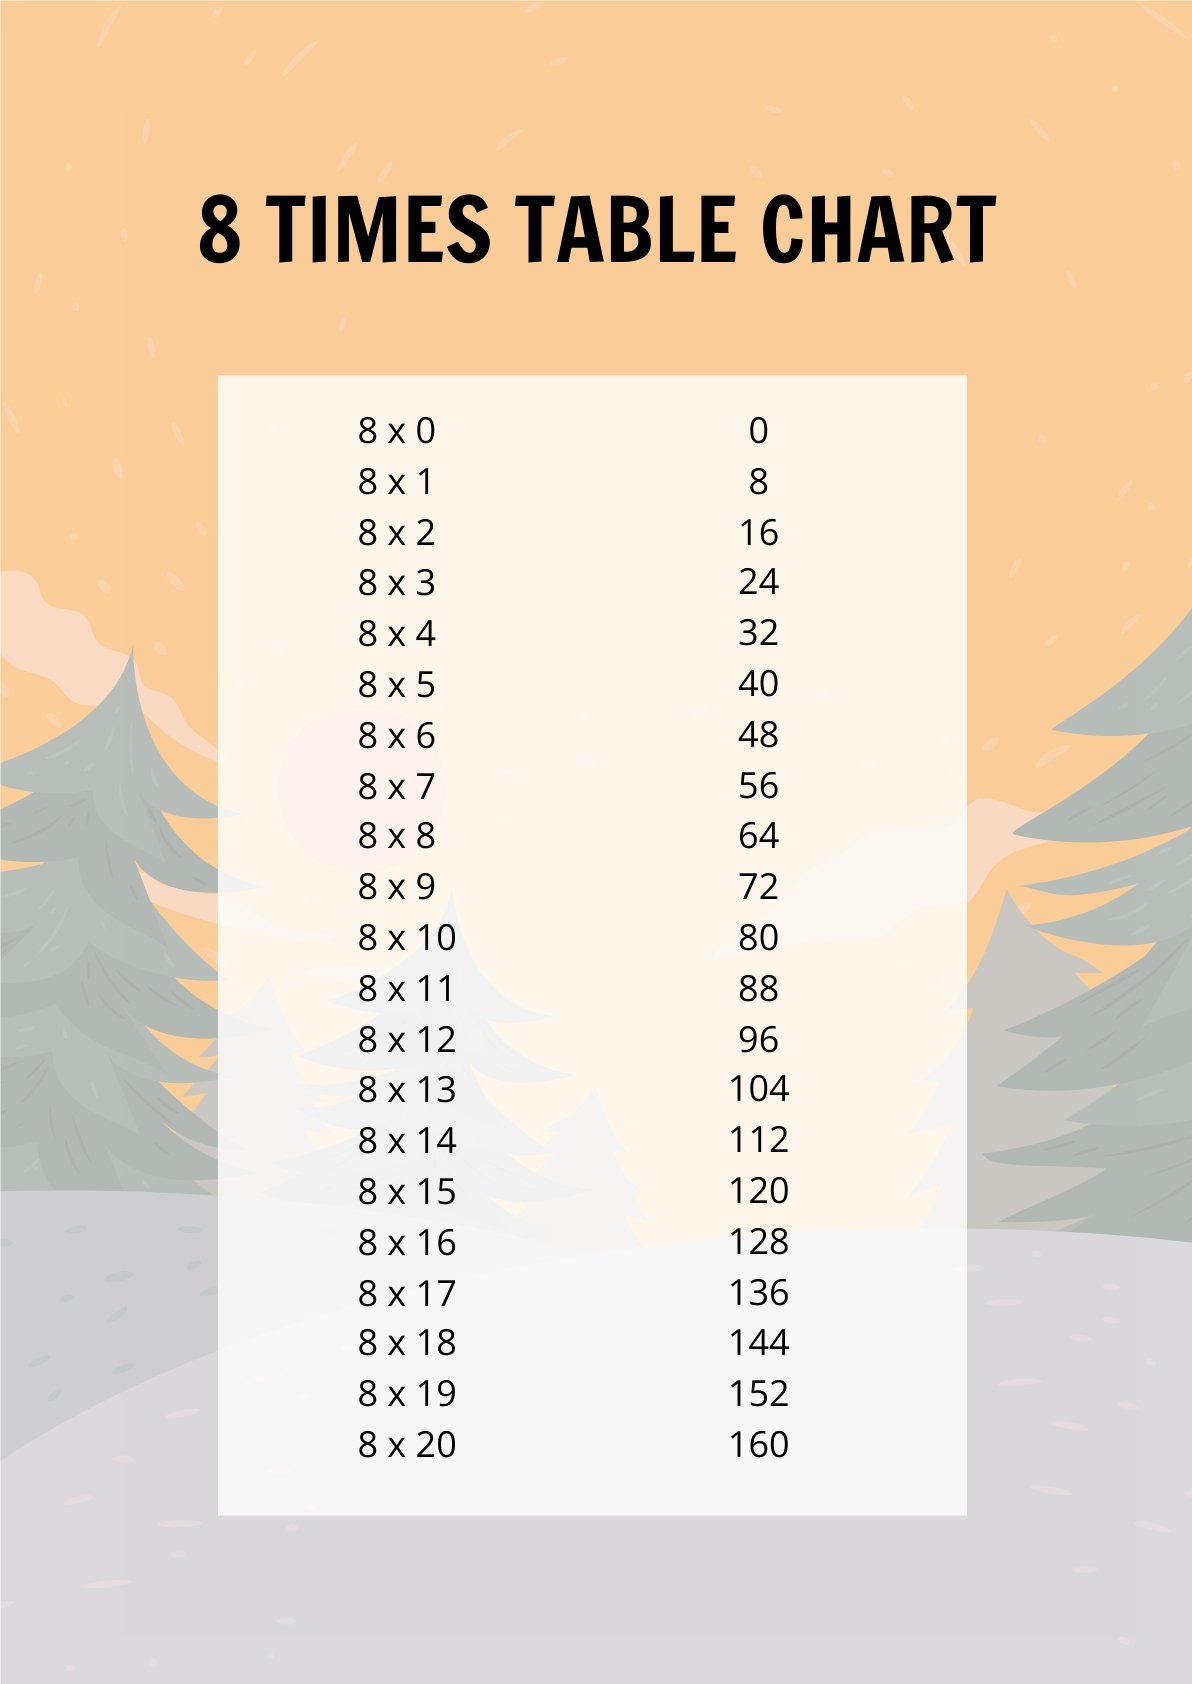 8 Times Table Chart Template